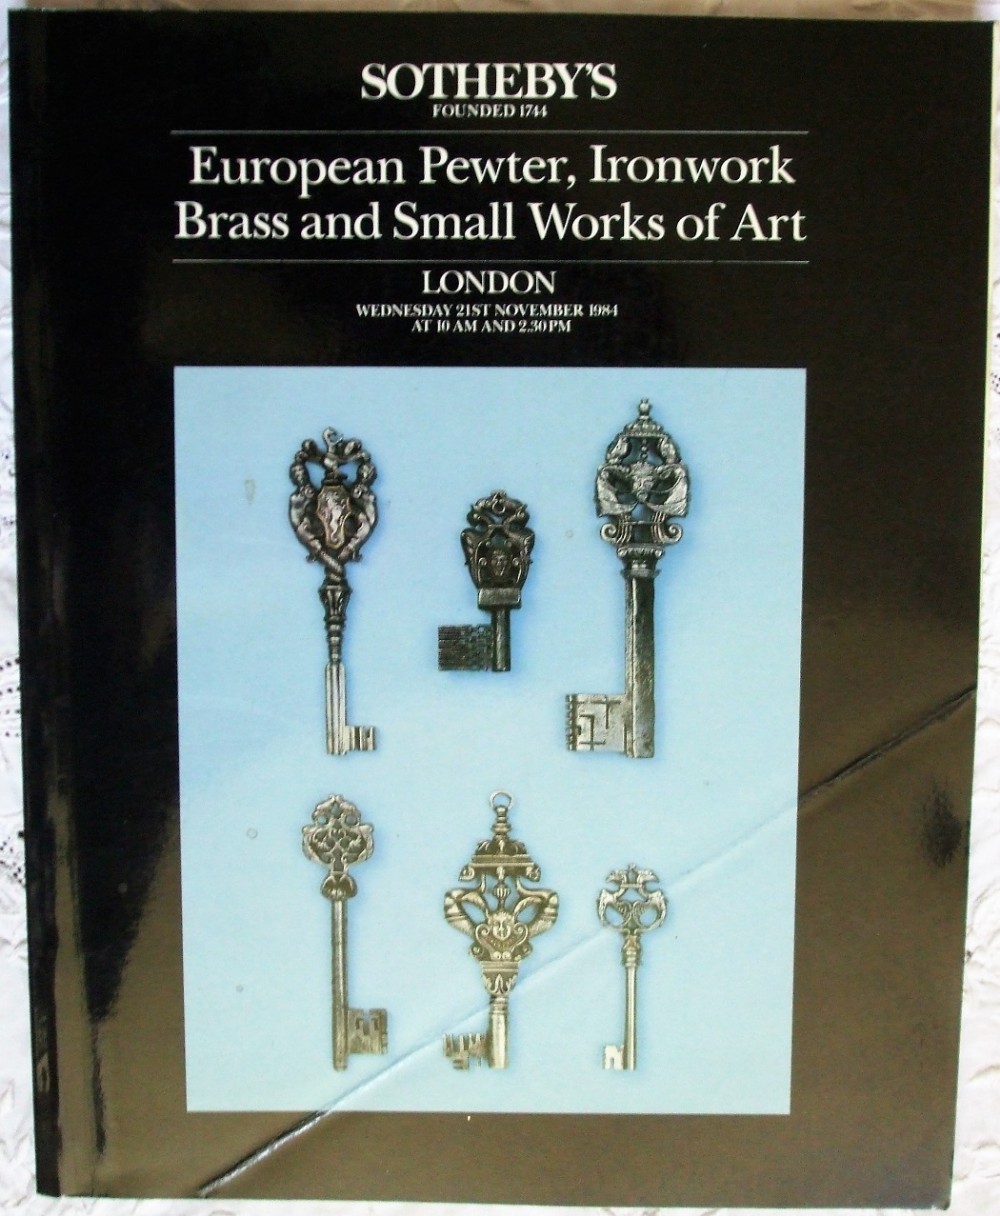 sotheby's european pewter ironwork brass and small works of art london 21 11 1984